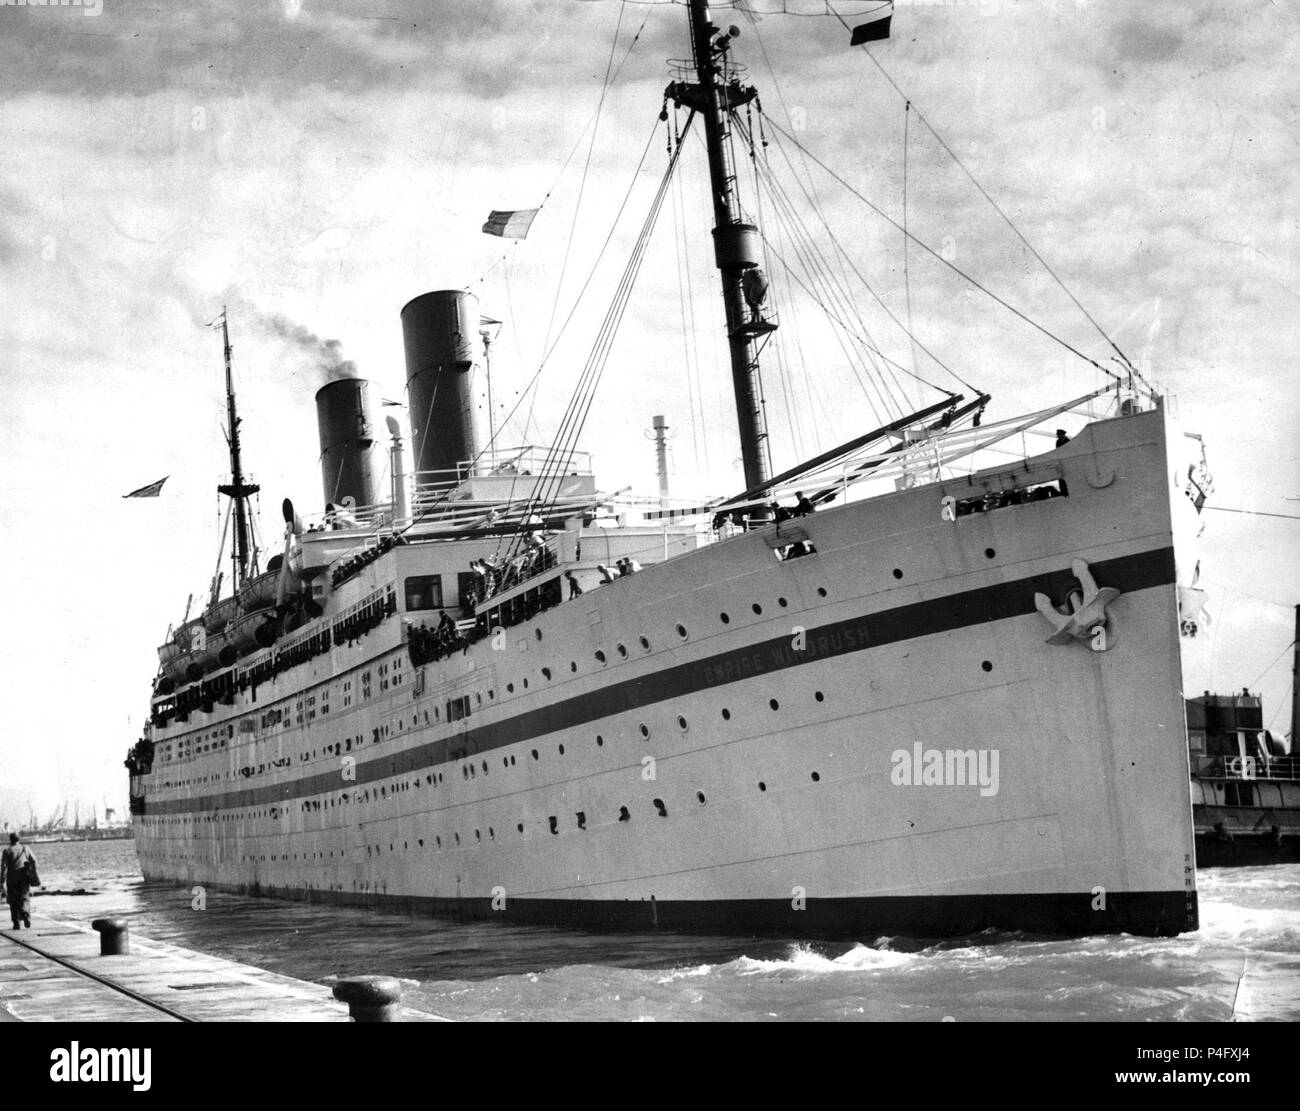 File photo dated 28/03/54 of the 14,651 ton British troopship, The 'Empire Windrush'. Theresa May, who has faced criticism, is expected to attend a Westminster Abbey service on Friday to mark the moment hundreds of Caribbean migrants departed the Empire Windrush ship in Tilbury Docks on June 22 1948. Stock Photo